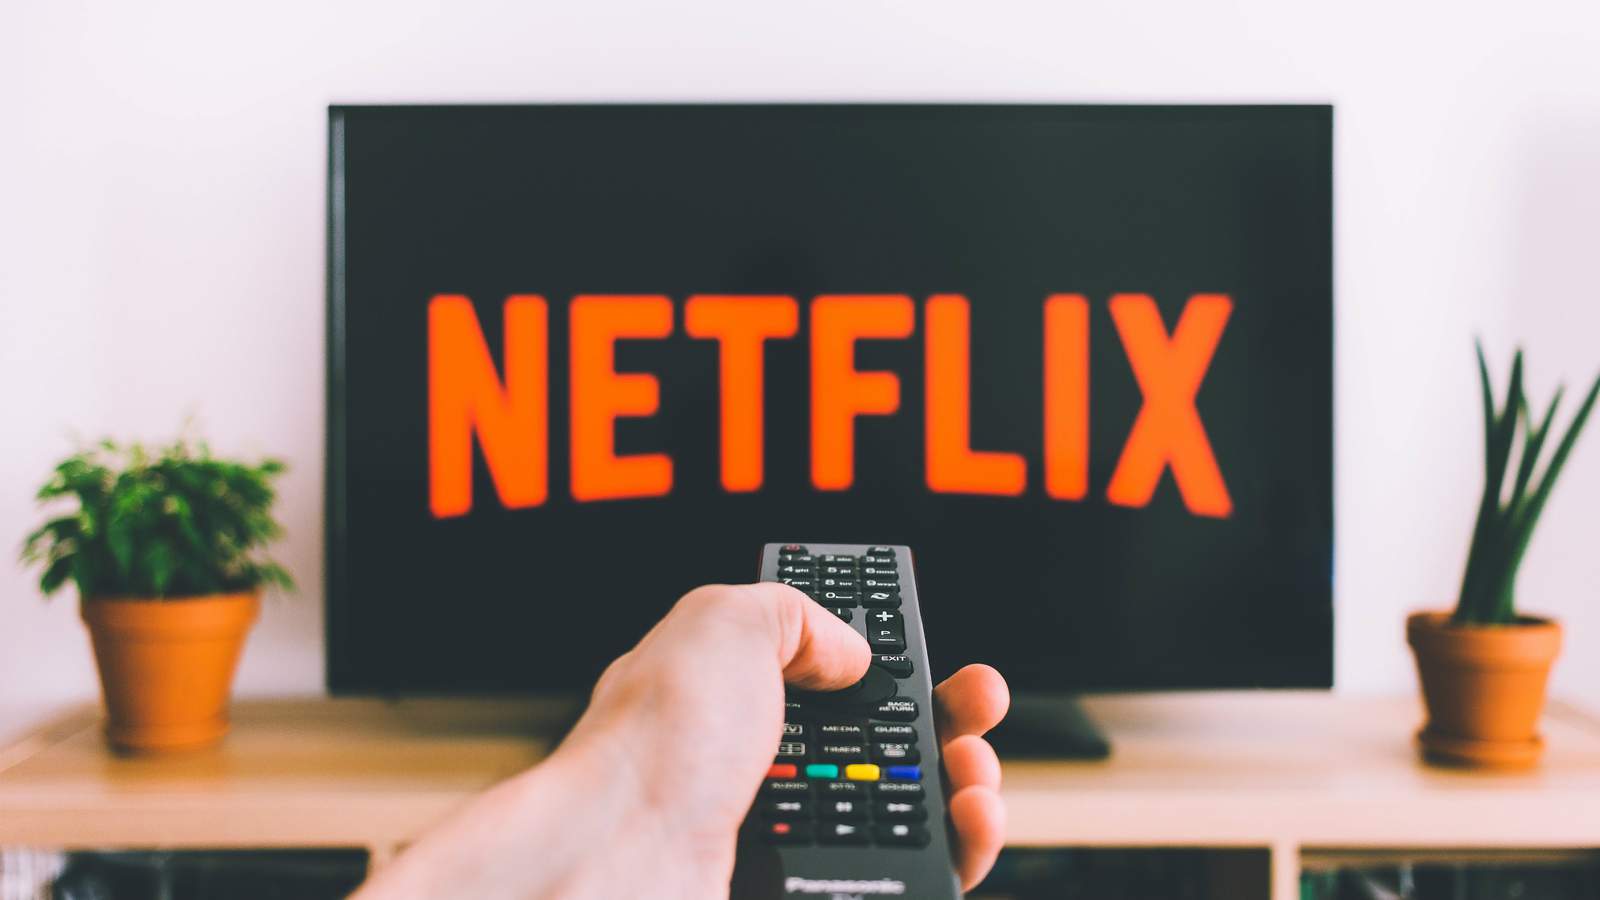 Netflix is slowing down in Europe to keep the internet from breaking